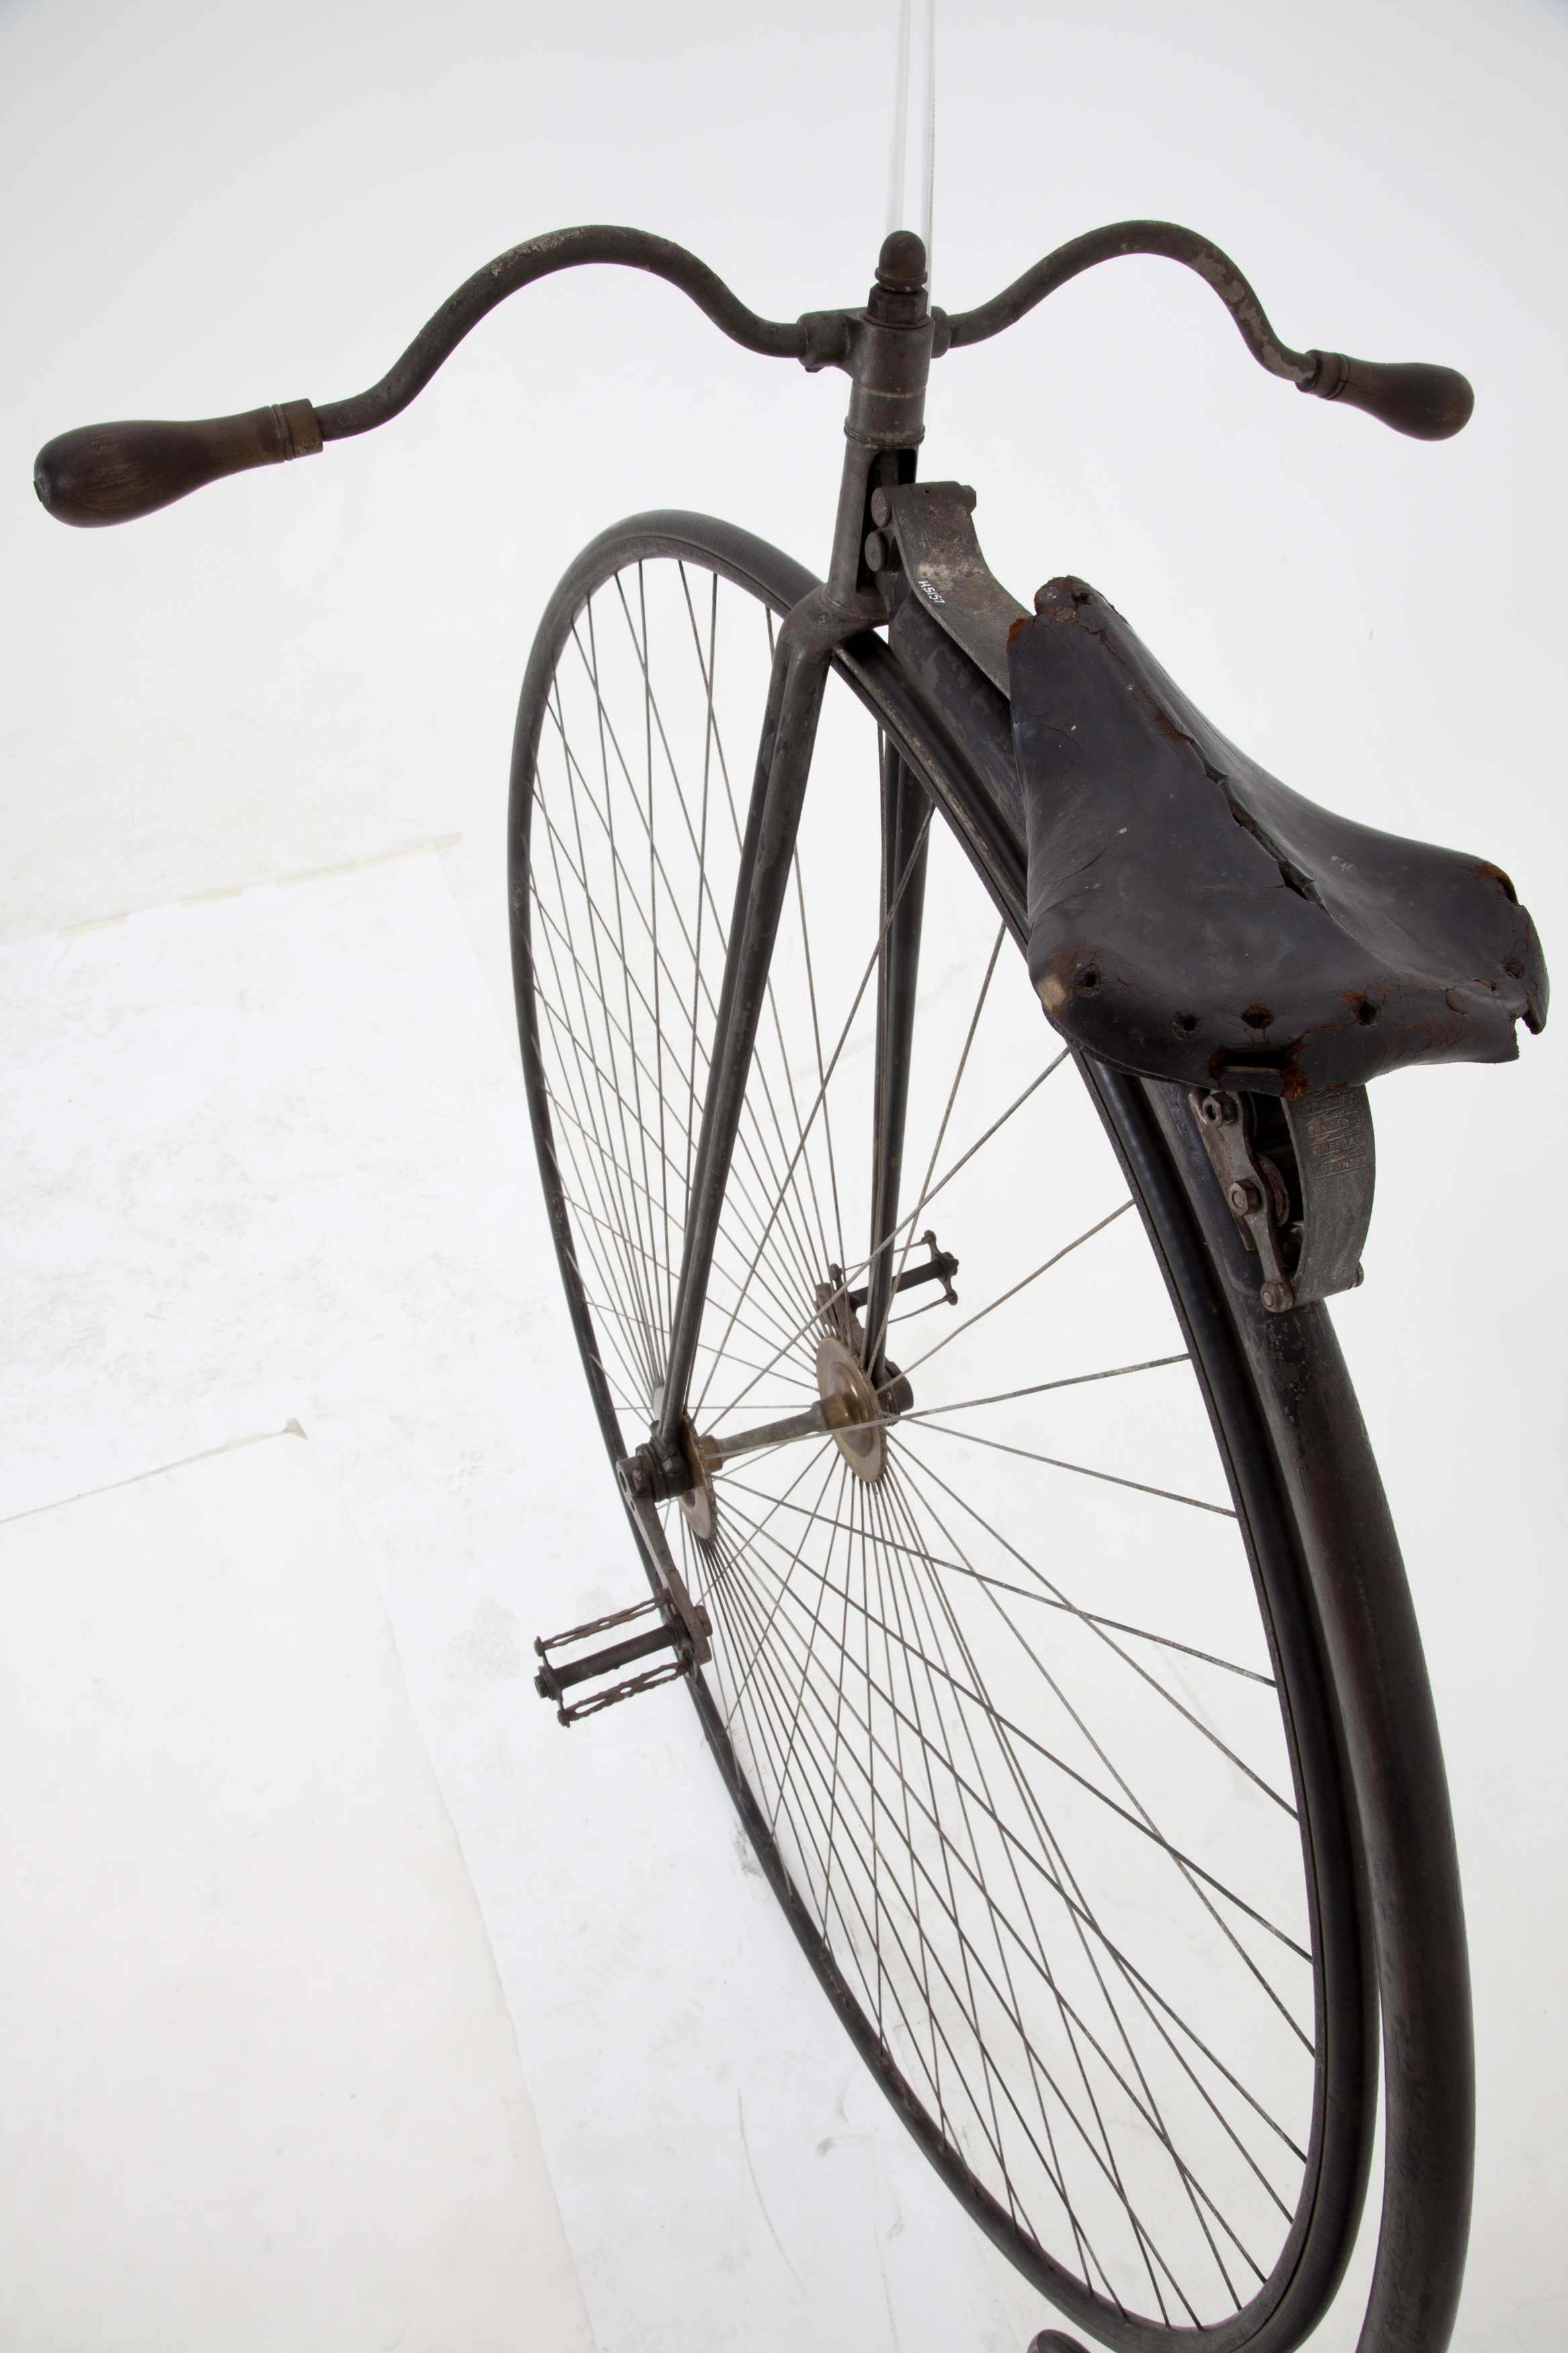 Star British Challenge penny farthing bicycle made by Singer & Co., Coventry, England, c.1885